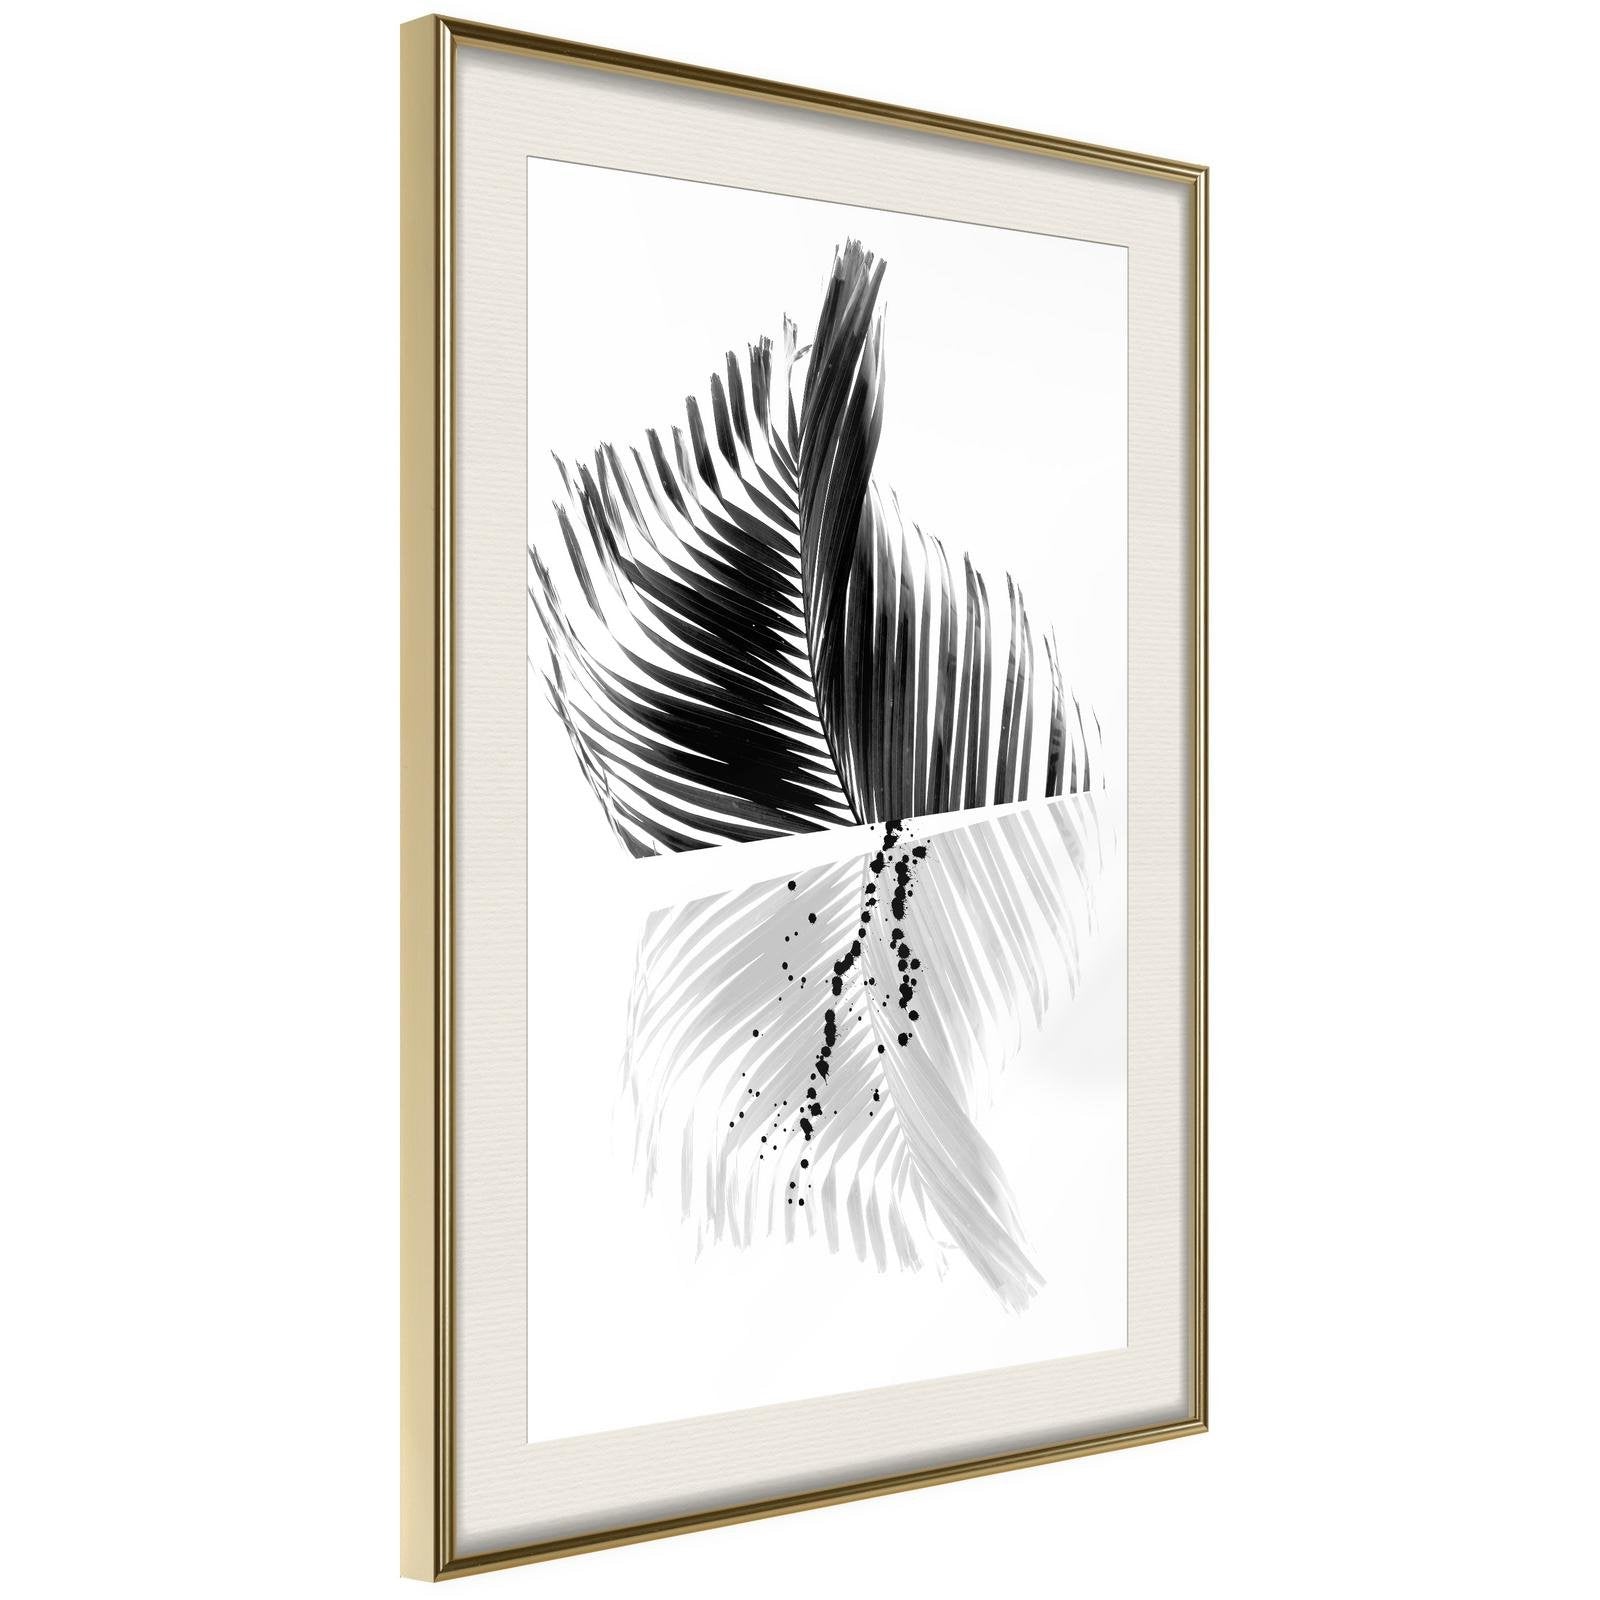 Inramad Poster / Tavla - Abstract Feather-Poster Inramad-Artgeist-20x30-Guldram med passepartout-peaceofhome.se